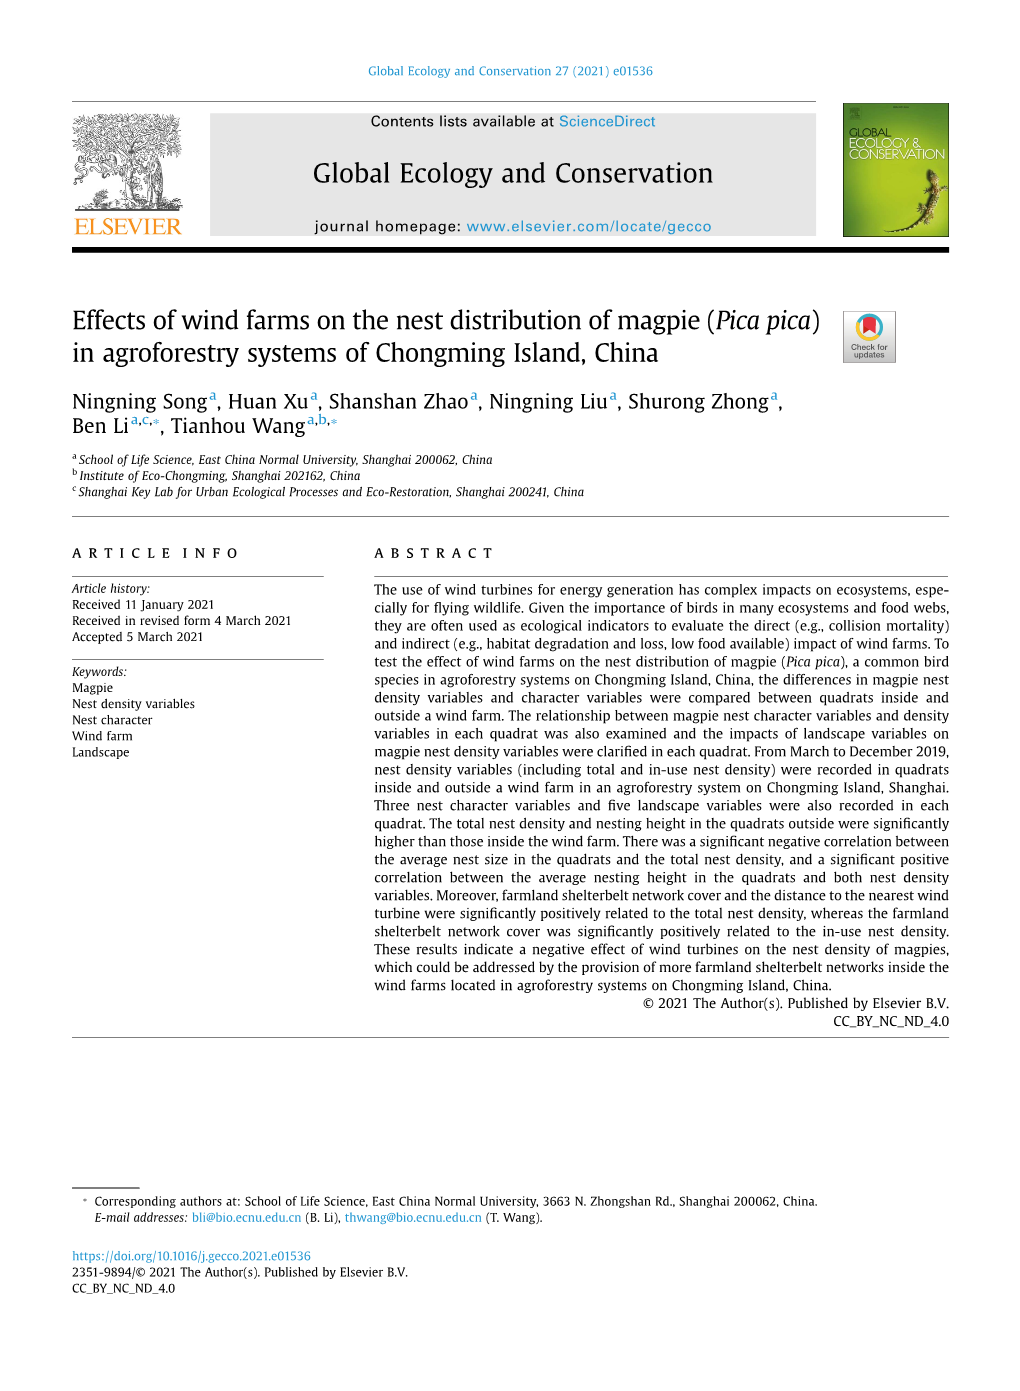 Effects of Wind Farms on the Nest Distribution of Magpie (Pica Pica) ]] in Agroforestry Systems of Chongming Island, China ]]]]]]]]